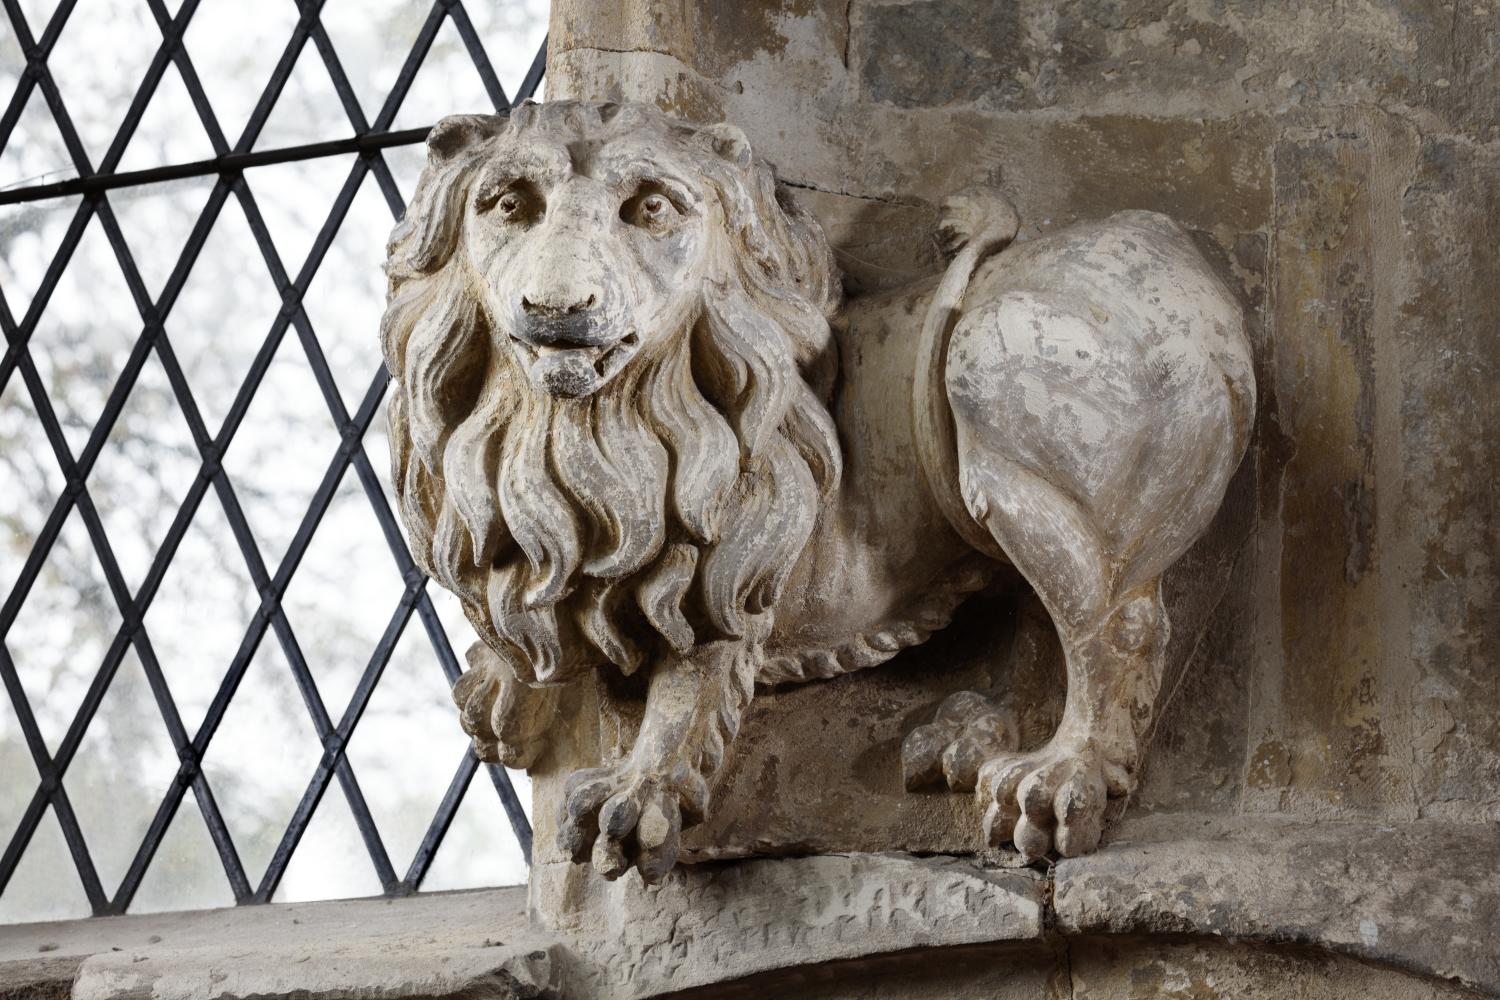 Stone carving of a lion on an interior wall next to a leaded window.